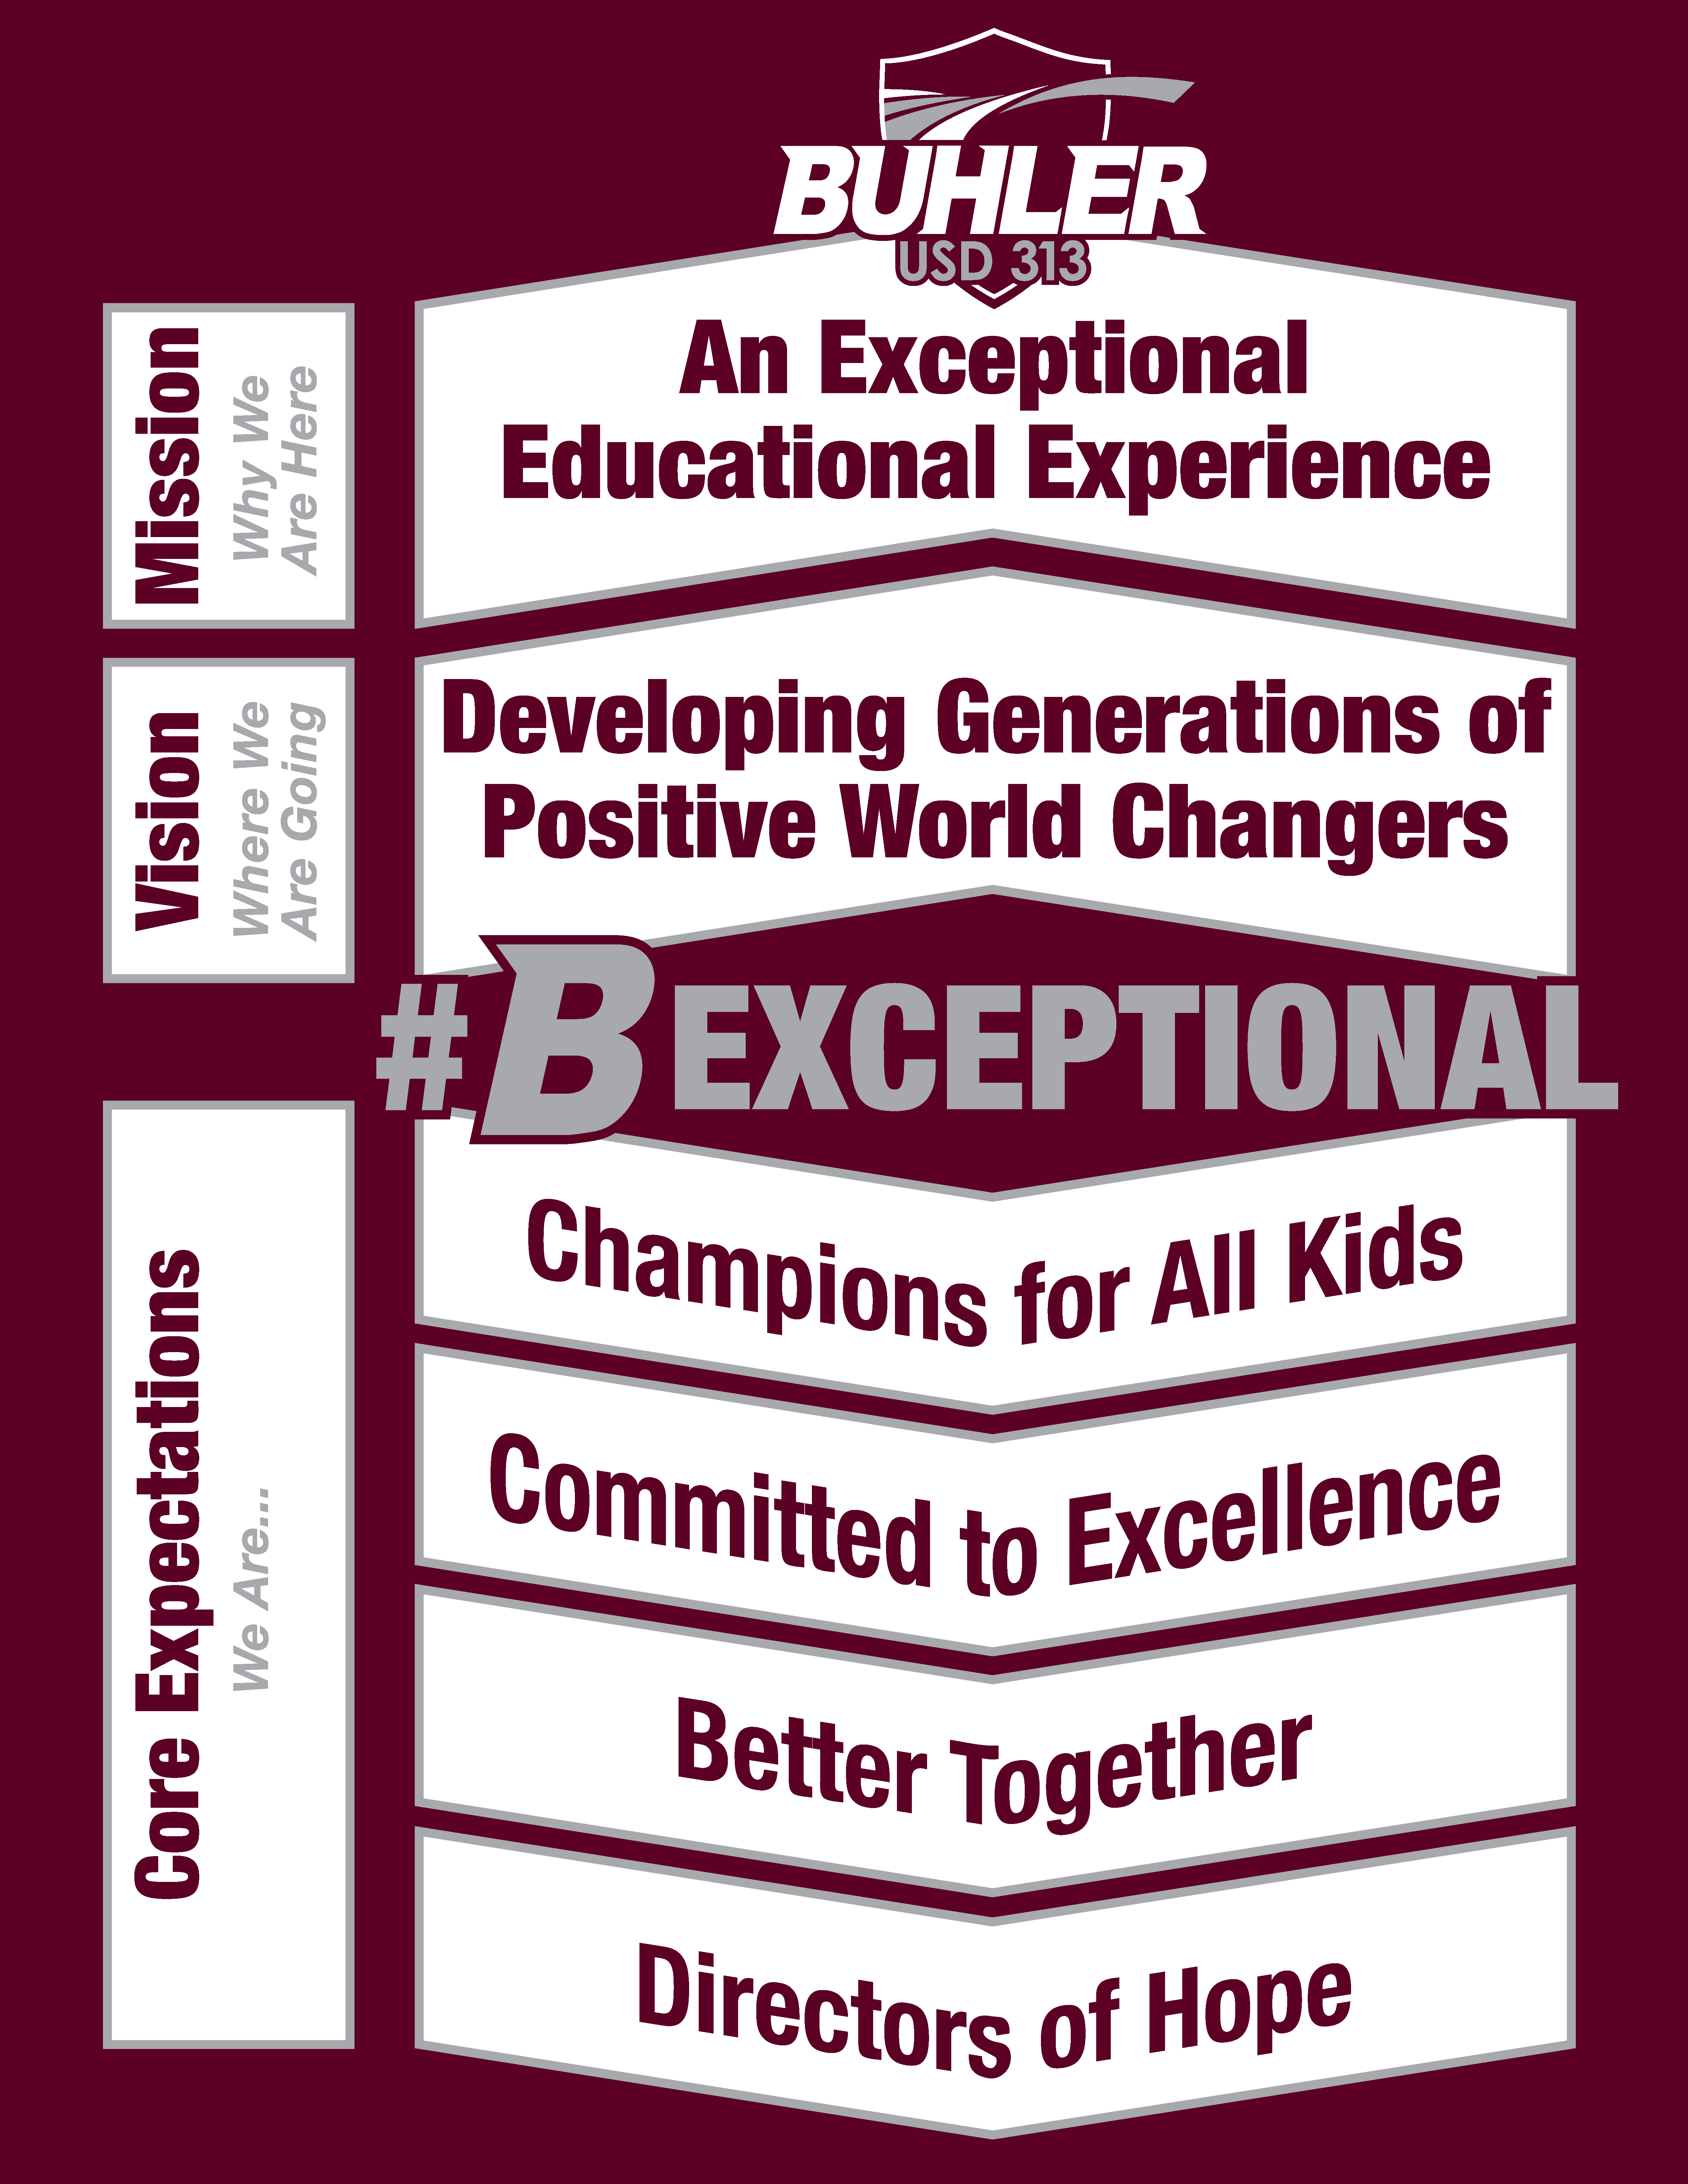 Mission: Why We Are Here - An Exceptional Educational Experience. Vision: Where We Are Going. Developing Generations of Positive World Changers. #BExceptional Core Expectations: We Are... Champions for all Kids, Committed to Excellence, Better Together, Directors of Hope. 